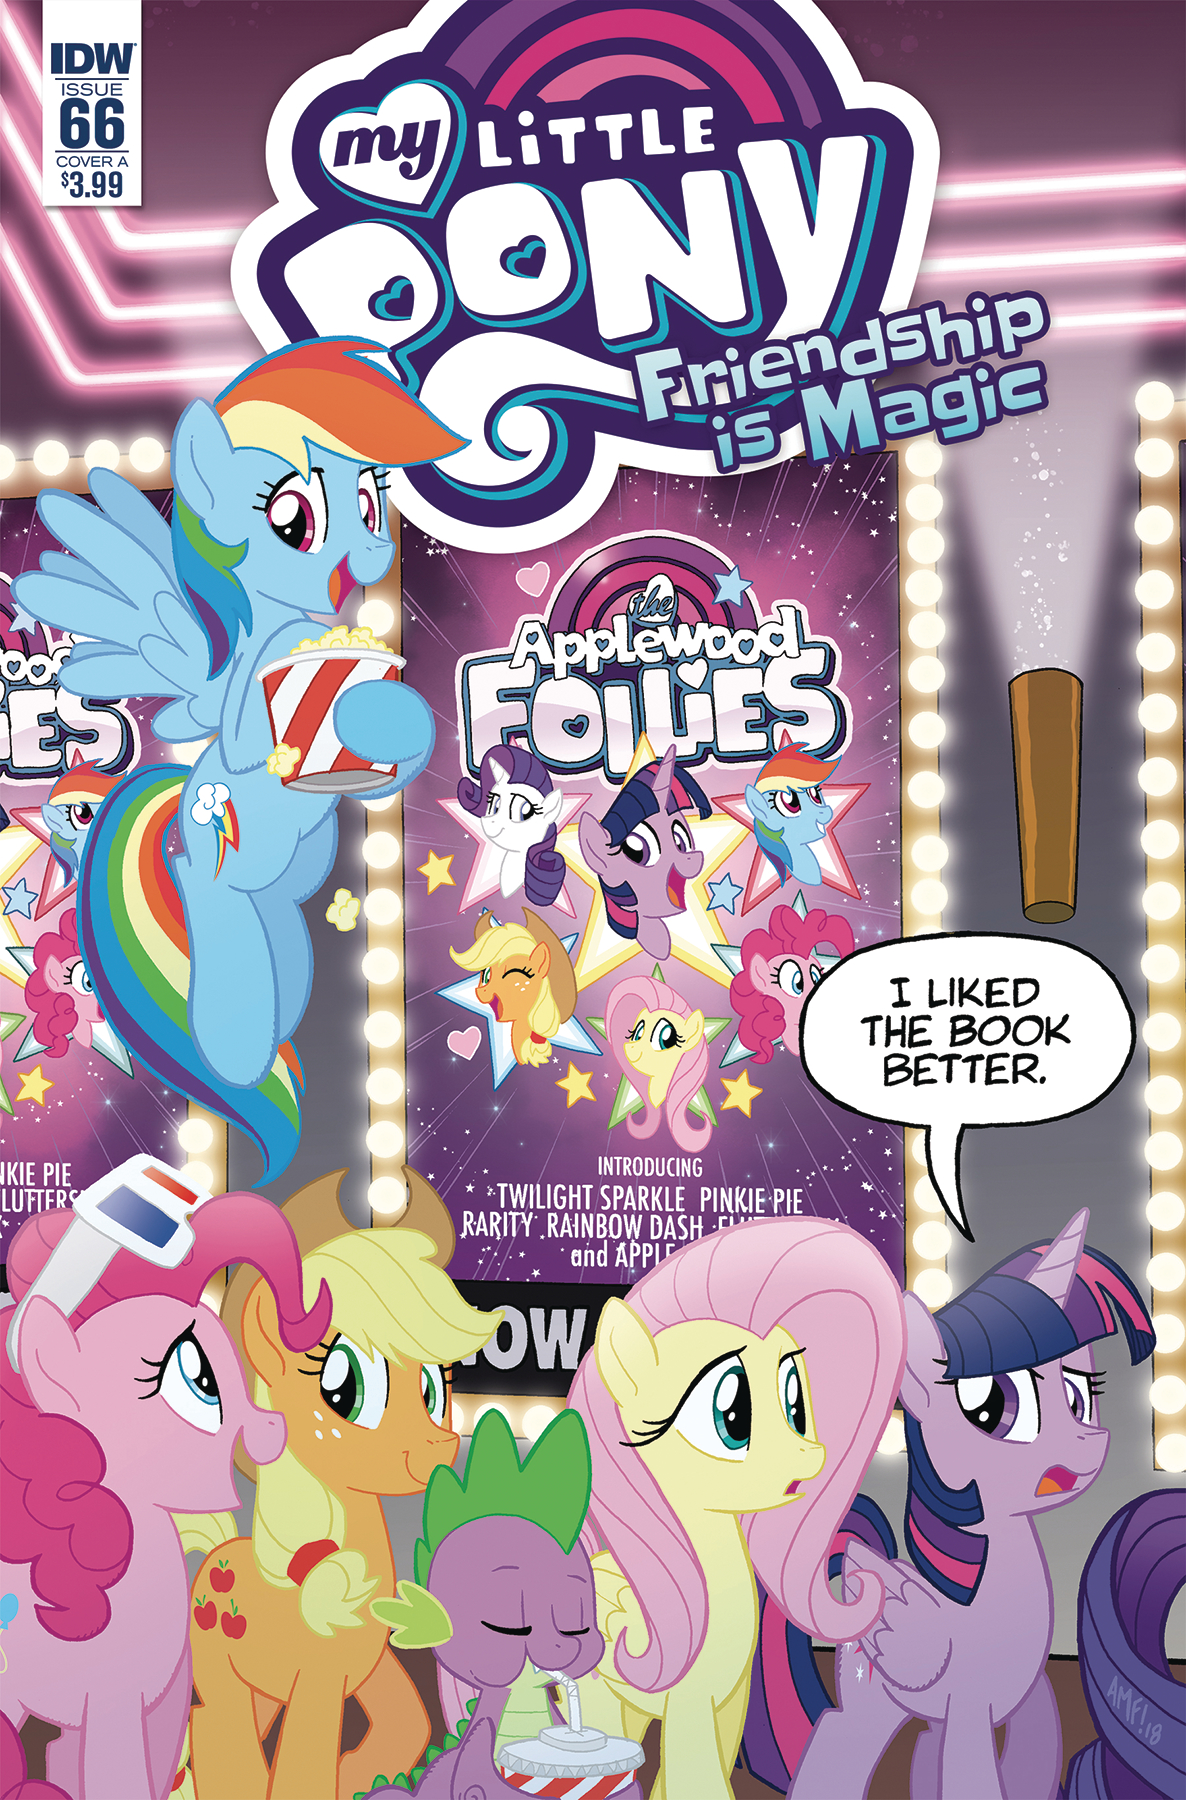 My Little Pony: Friendship is Magic no. 66 (2013 Series)